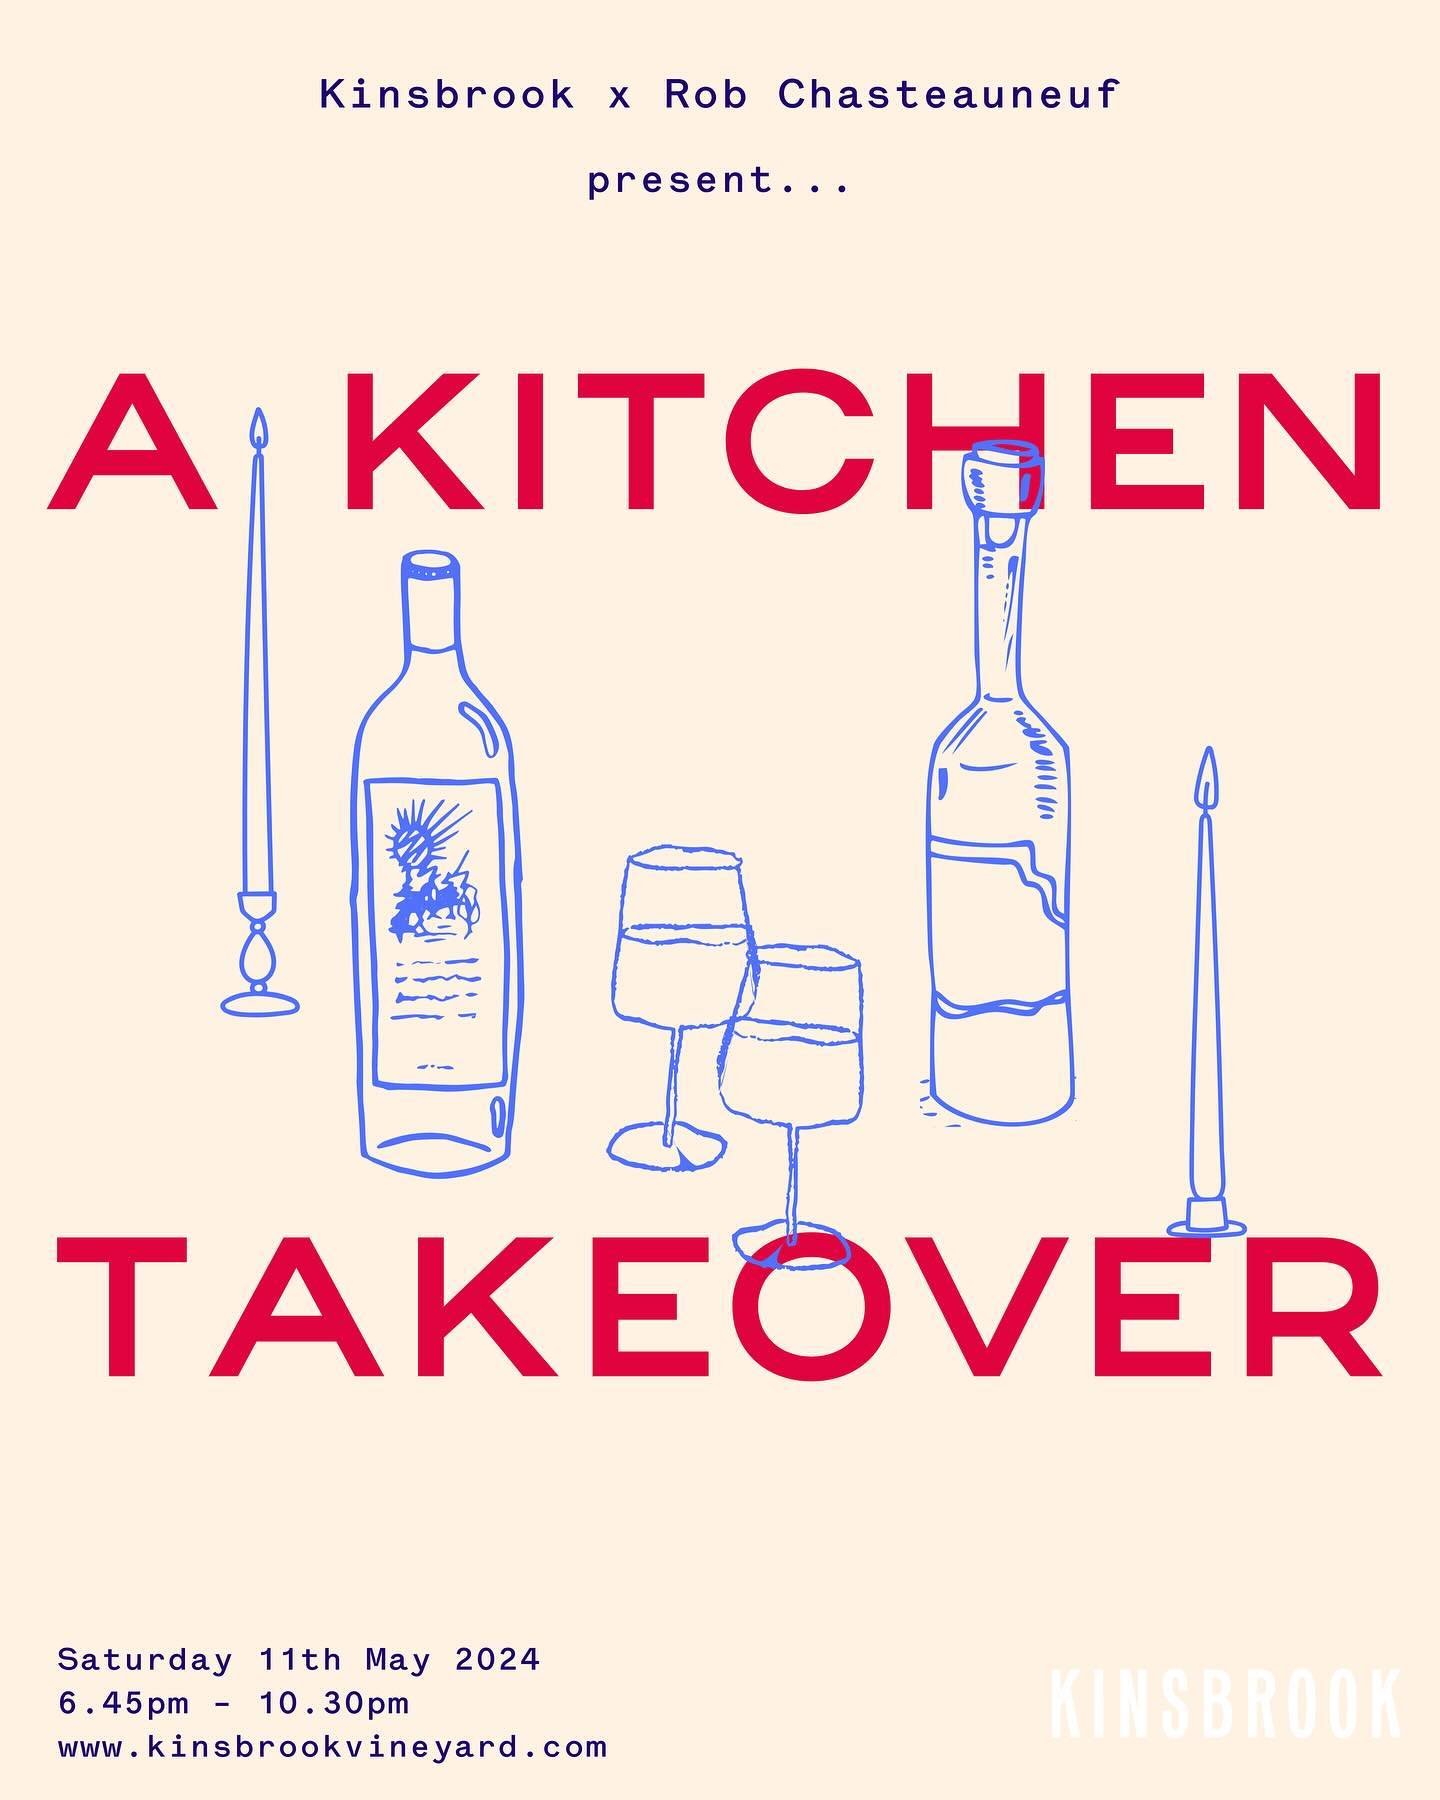 NEW EVENT, WHO DIS 🍴 
 
We are beyond excited to announce a brand new event on Saturday 11th May: A Kitchen Takeover with Guest Chef Rob Chasteauneuf.

Rob worked alongside Heston Blumenthal and Ashley Palmer-Watts at the Hind&rsquo;s Head in Bray, 